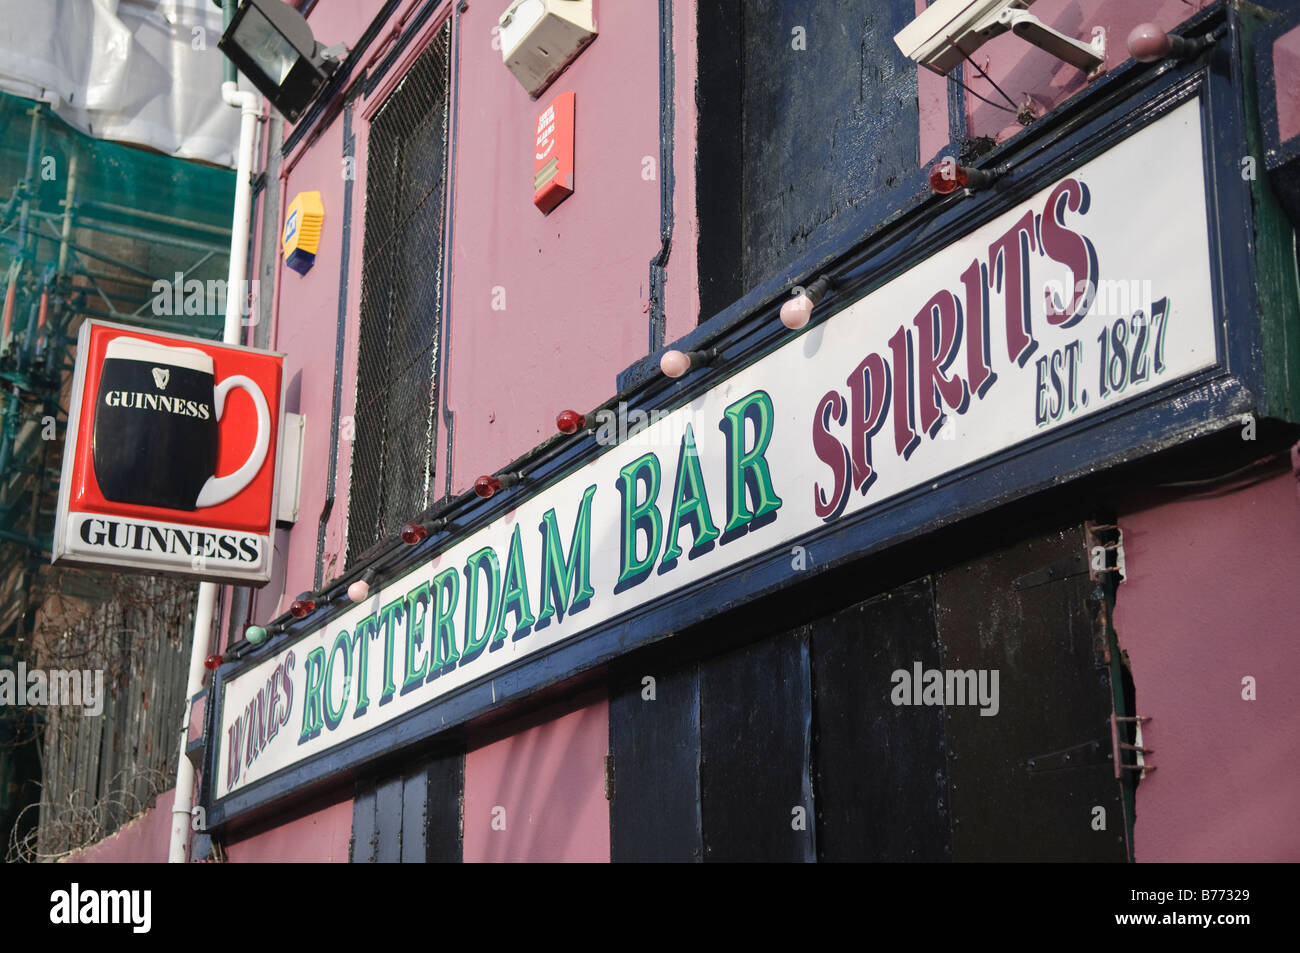 Rotterdam Bar, Belfast, owned and run by Chris Roddy. Stock Photo